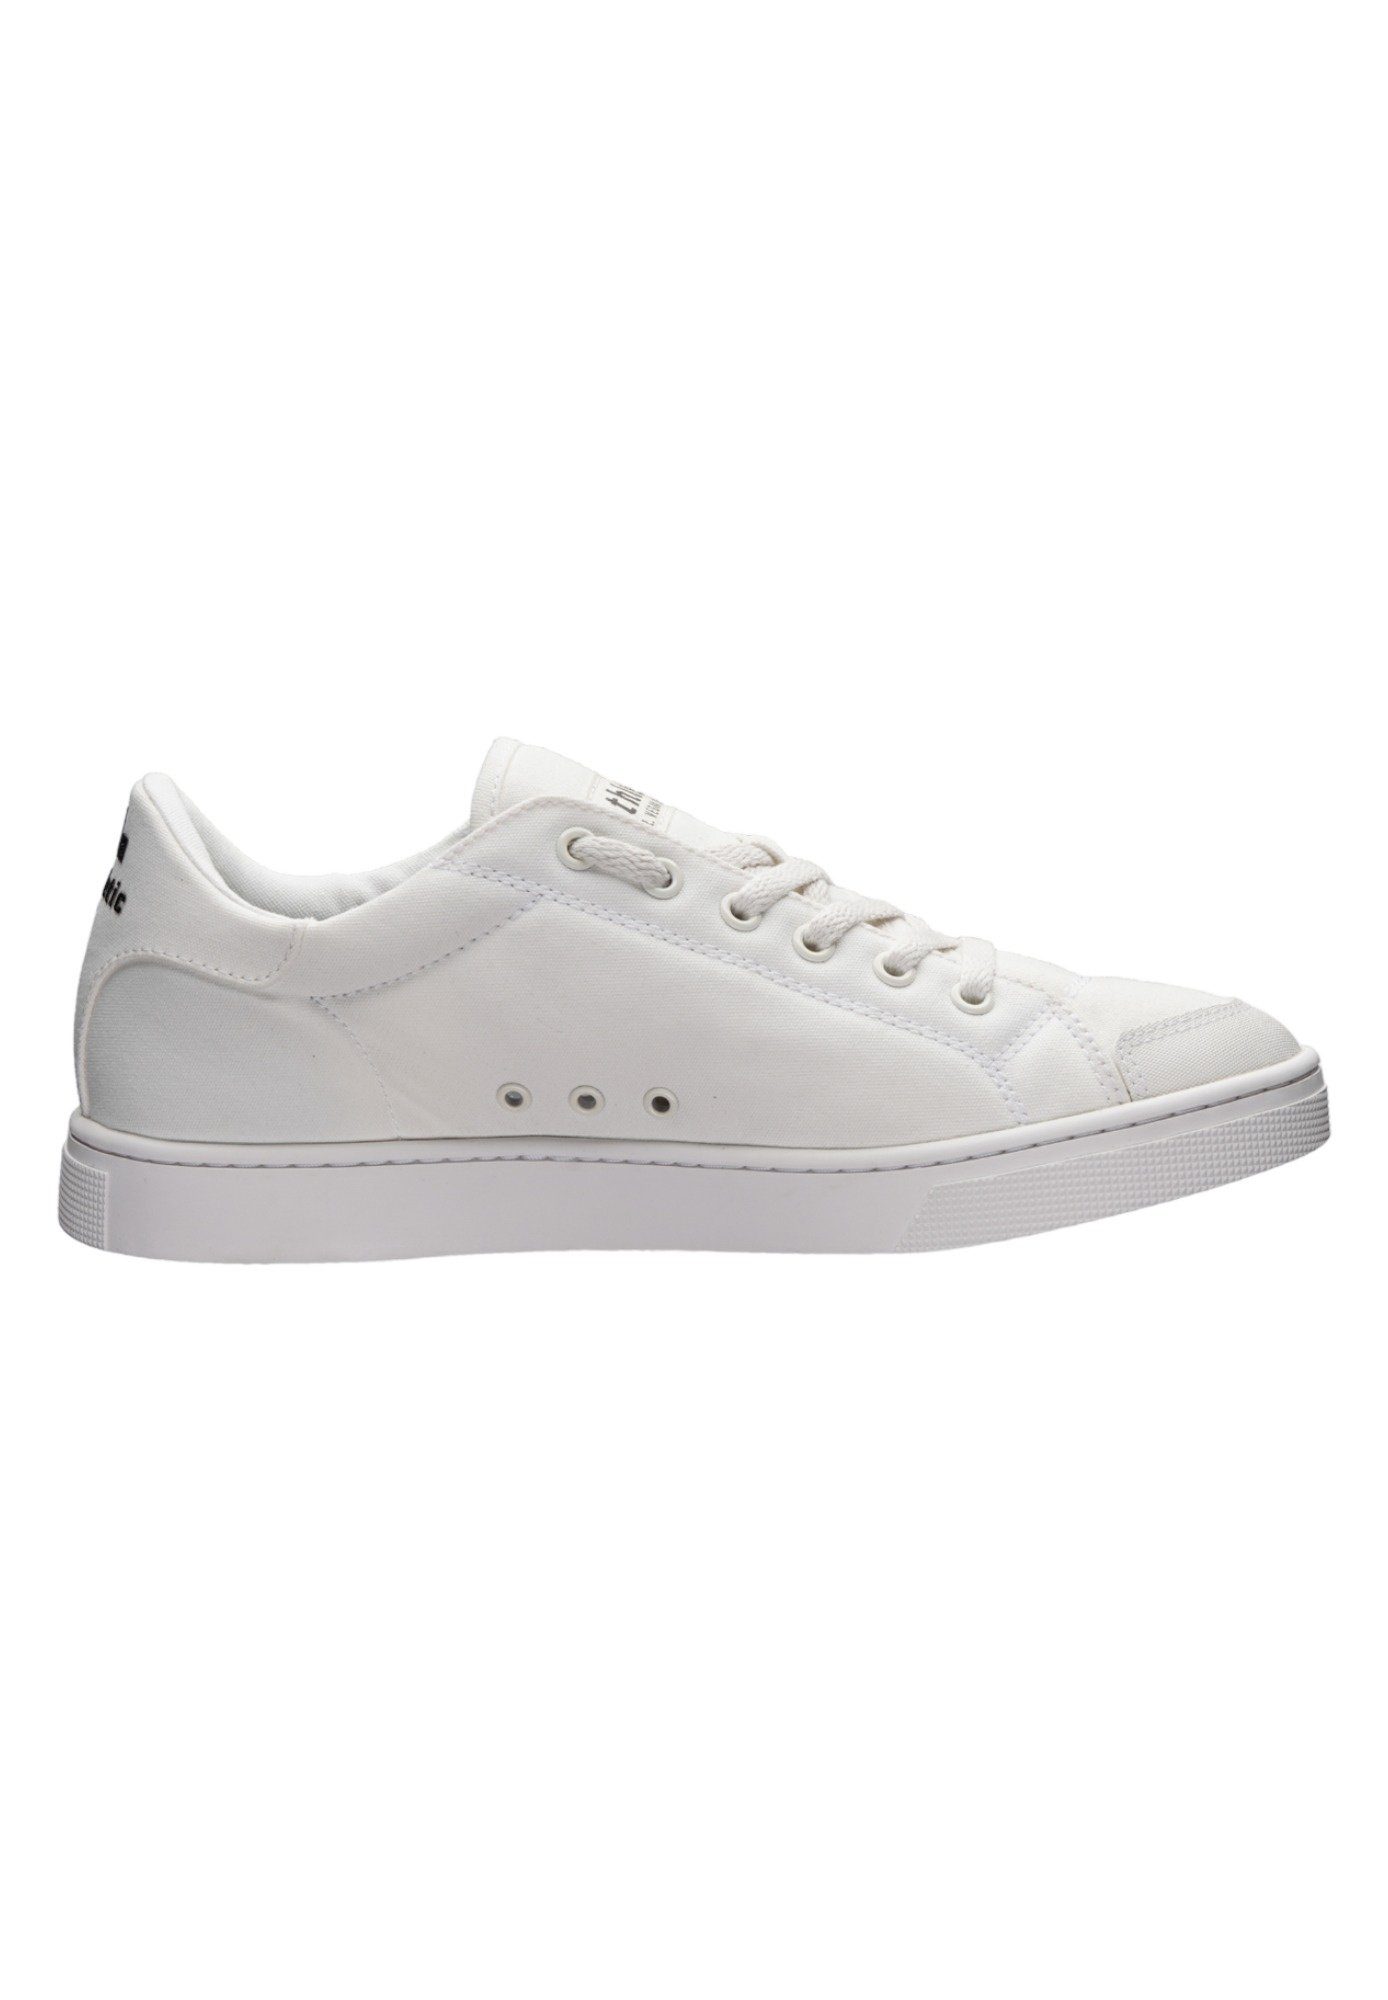 Lo Just White Cut Active Just Produkt ETHLETIC Sneaker Fairtrade - White